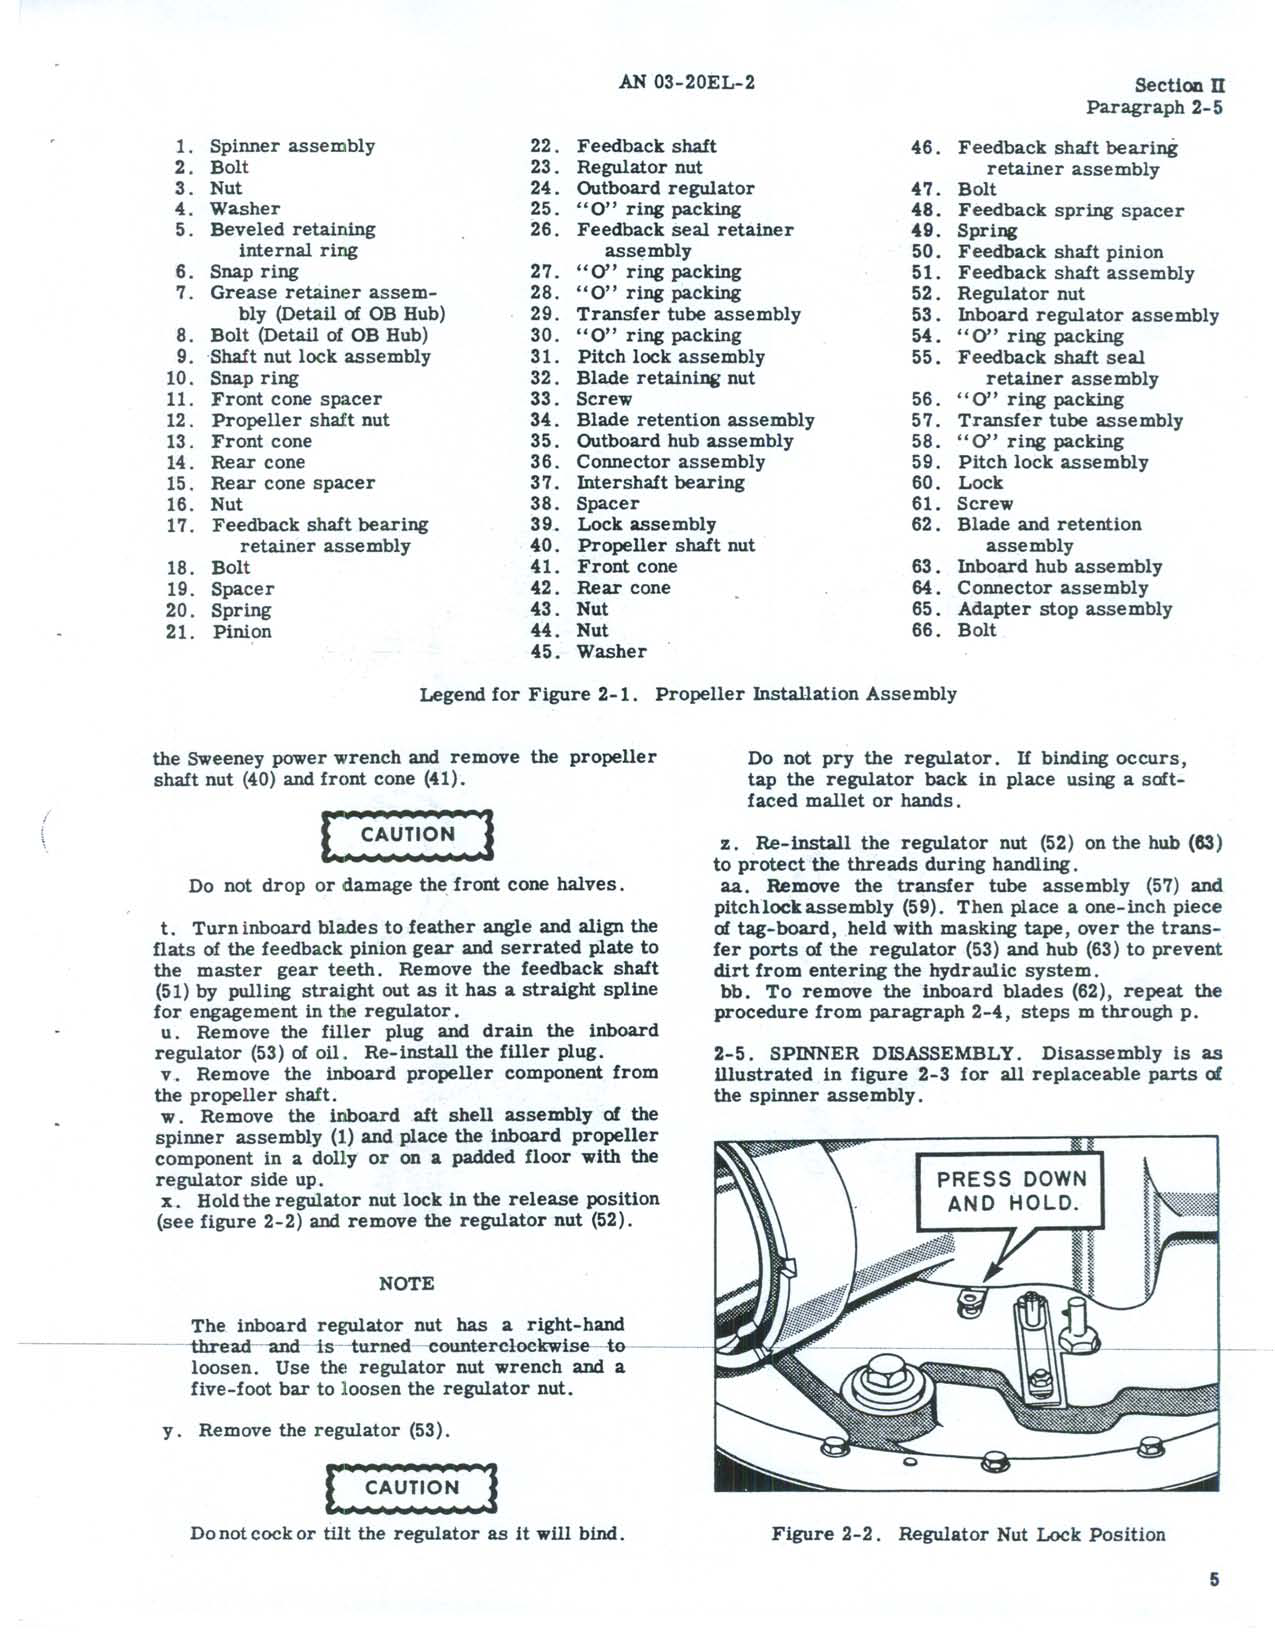 Sample page 9 from AirCorps Library document: Propeller Handbook Overhaul Instructions 